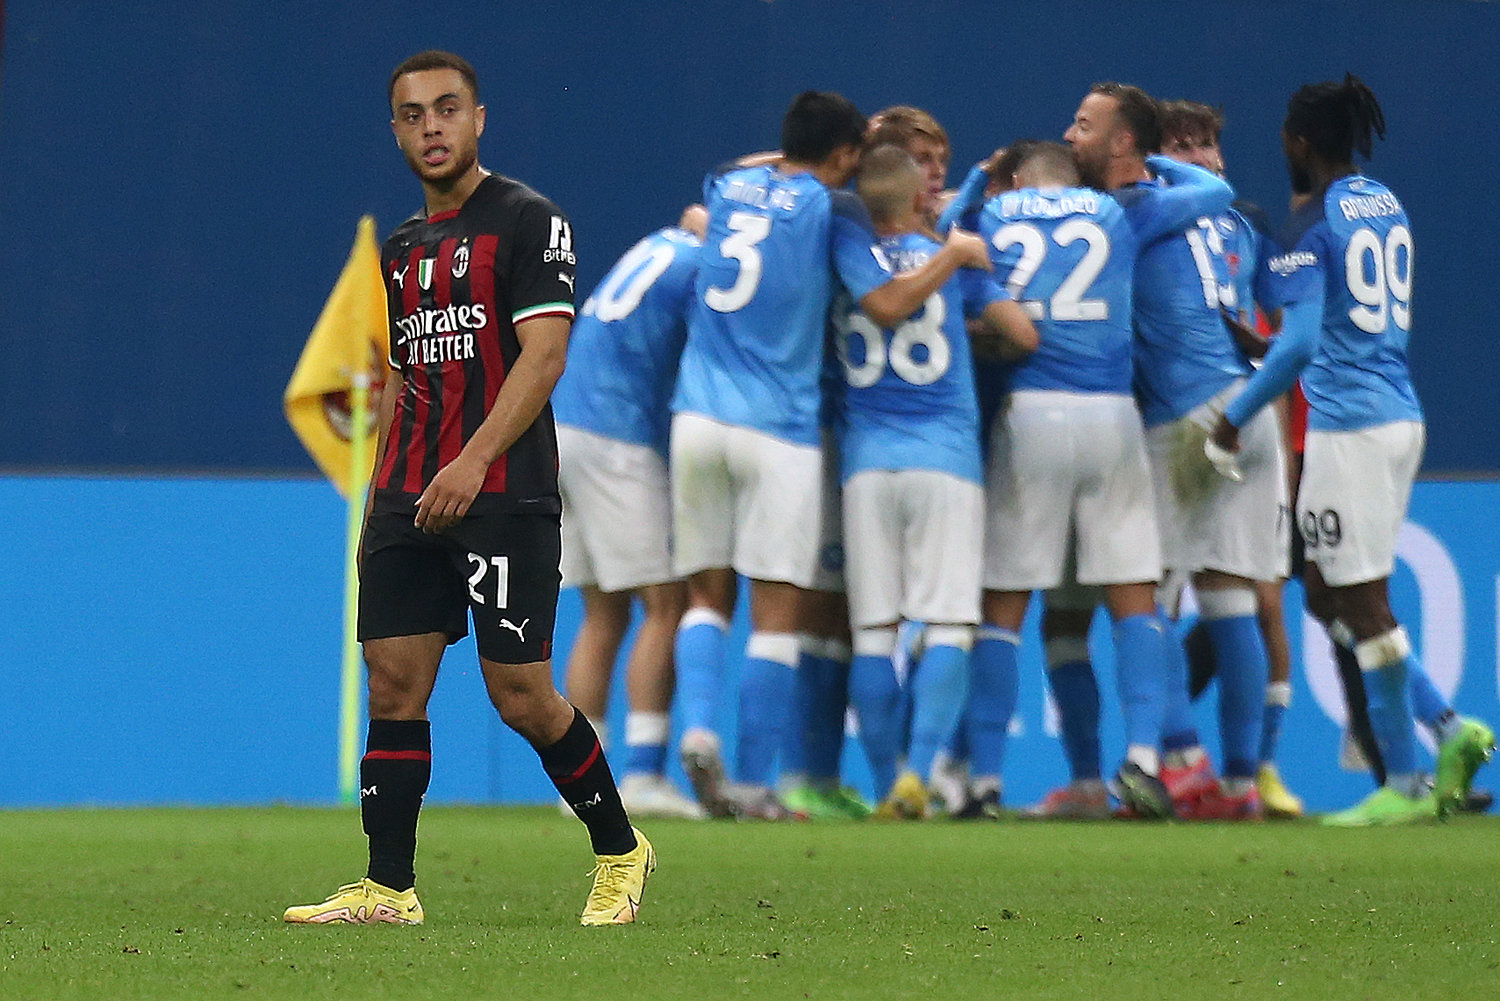 AC Milan's Sergi√±o Dest, left, walks away as Napoli players celebrate a goal during a Serie A soccer match Sunday Sept. 18, 2022, in Milan. United States defender Sergi√±o Dest joined Italian champion AC Milan with the hope of getting more playing time ahead of the World Cup. He‚Äôs gotten off to a tough start.